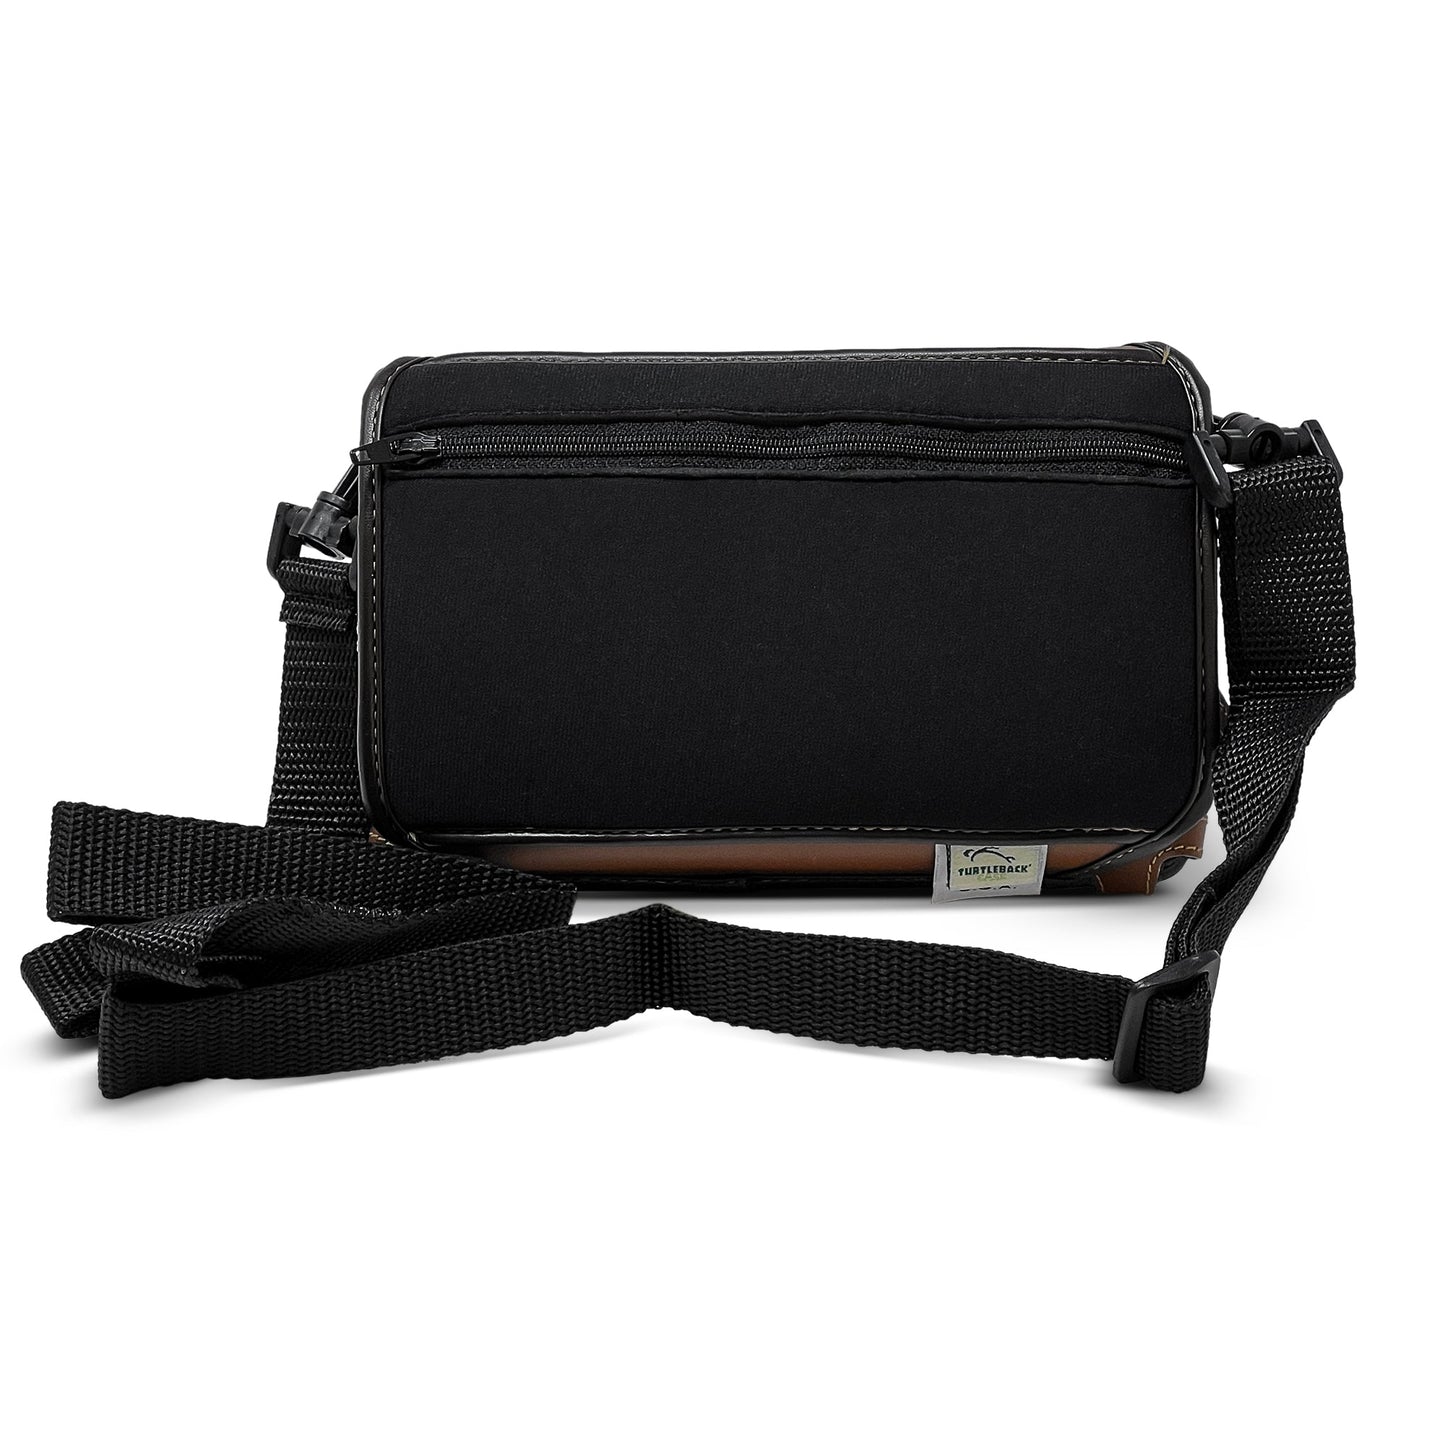 APH Chameleon 20 Fitted leather case with straps by Turtleback